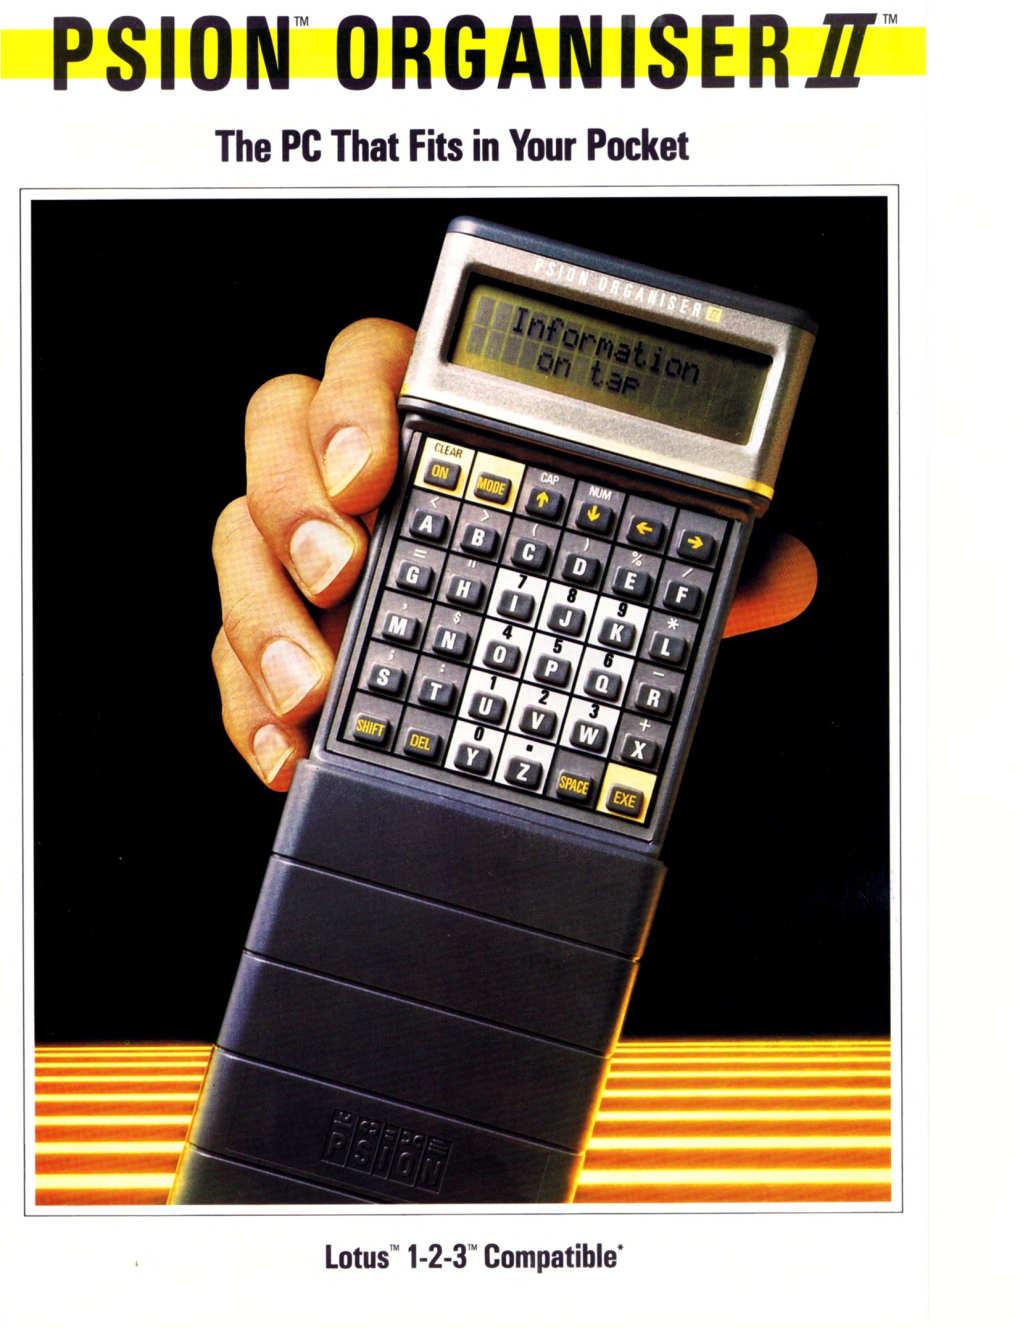 Psion Organiser II Has Are Those Which Are Designed to Run Software Theequiaatentoftncodiskdtioes — Tuaothumb-Sized Applications